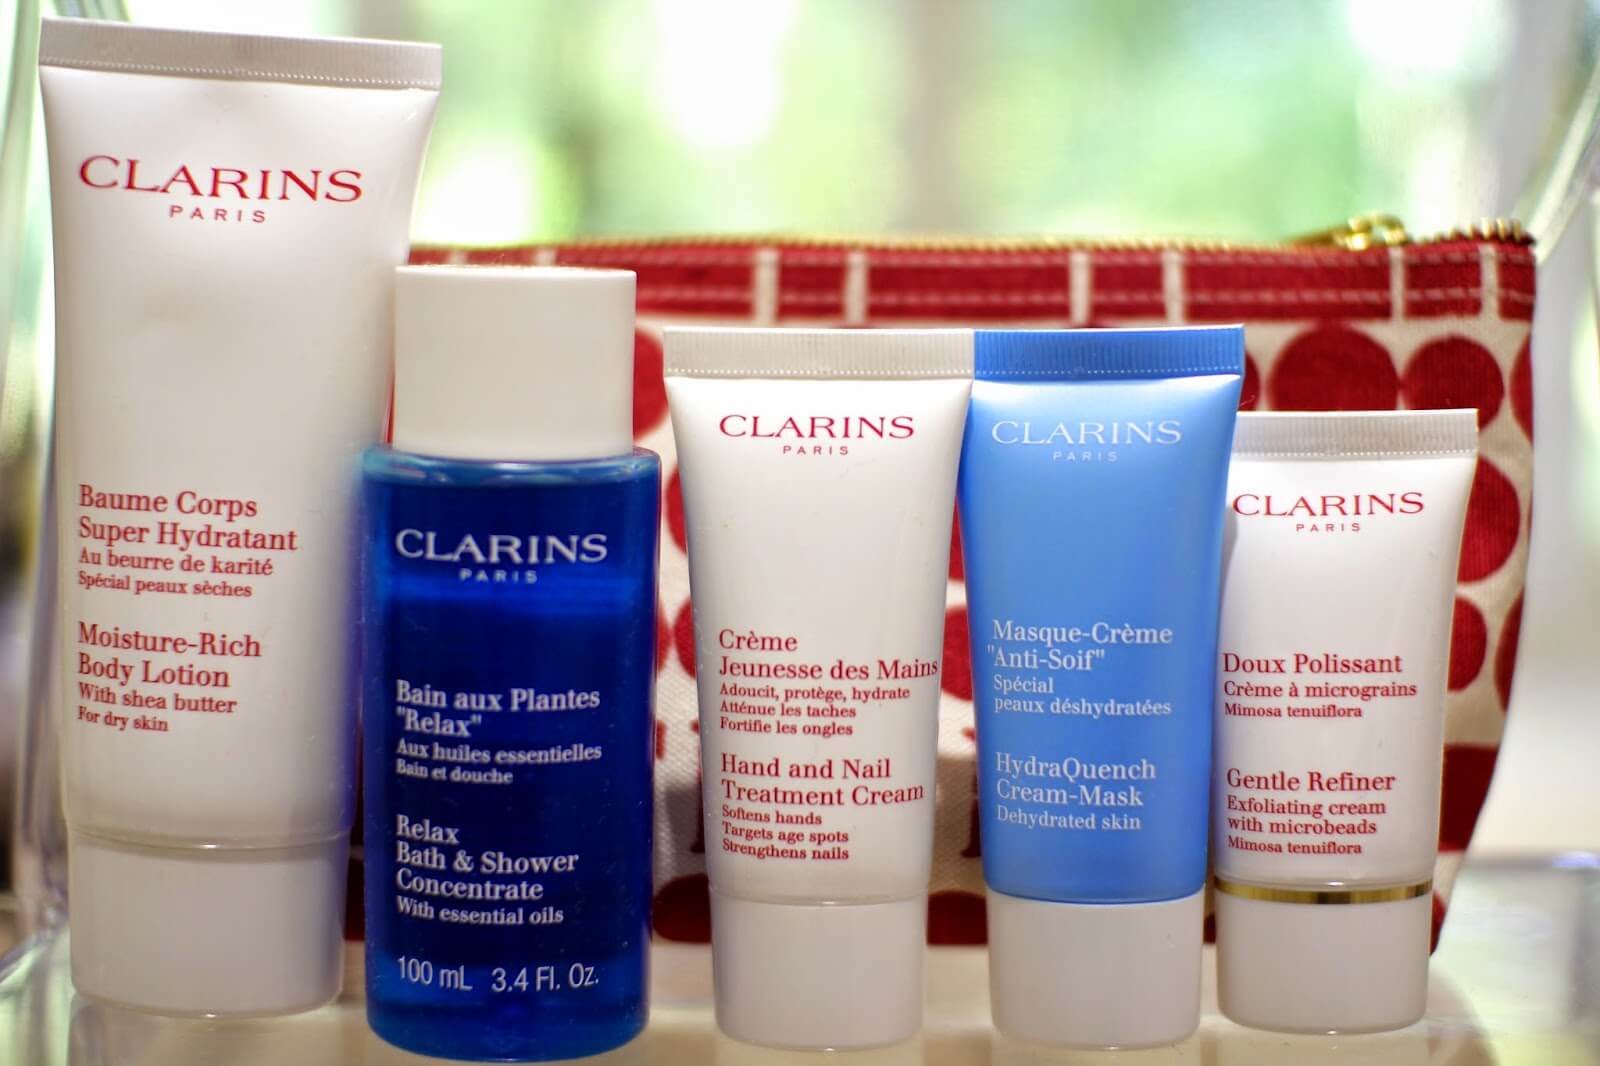 Clarins,Relax Bath & Shower Concentrate 100ml,Clarins Relax Bath & Shower Concentrate 100ml,Relax Bath & Shower Concentrate,คาแรง รีแลกซ์ บาธ & ชาวเวอร์ คอนเซนเทรท,Relax Bath & Shower Concentrate 100ml รีวิว